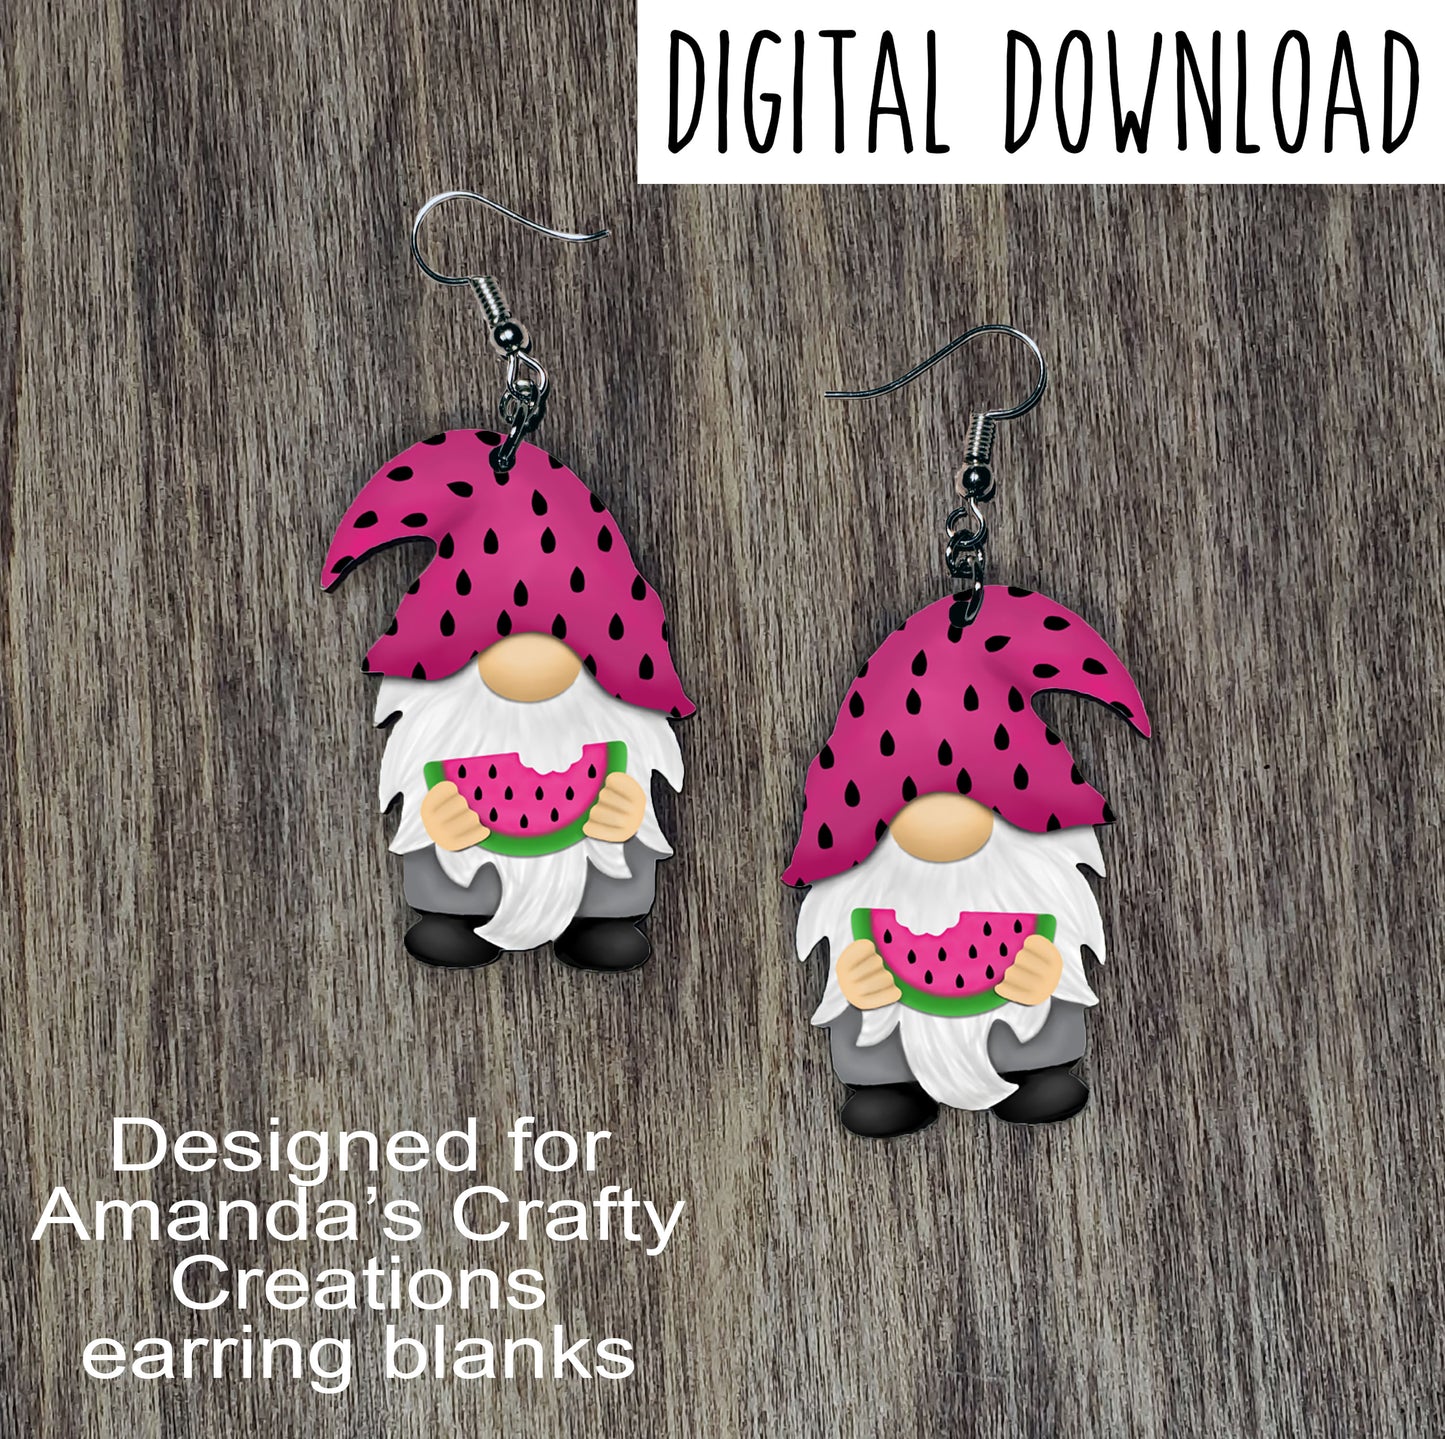 Watermelon Gnome Earring Sublimation Design, Hand drawn Gnome Sublimation earring design, digital download, JPG, PNG